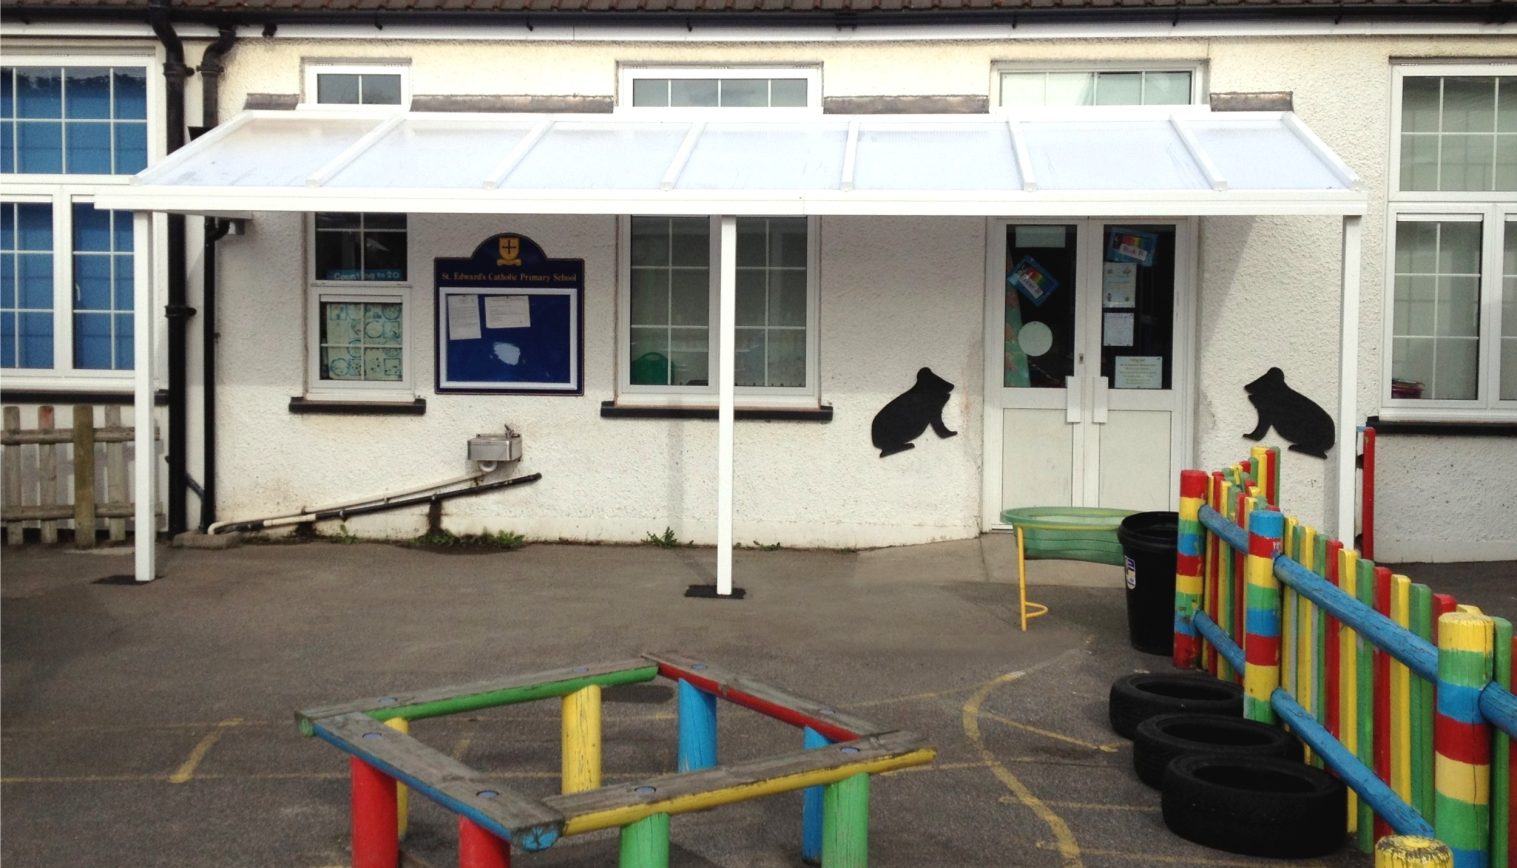 St Edward’s RC Primary School – Wall mounted canopy